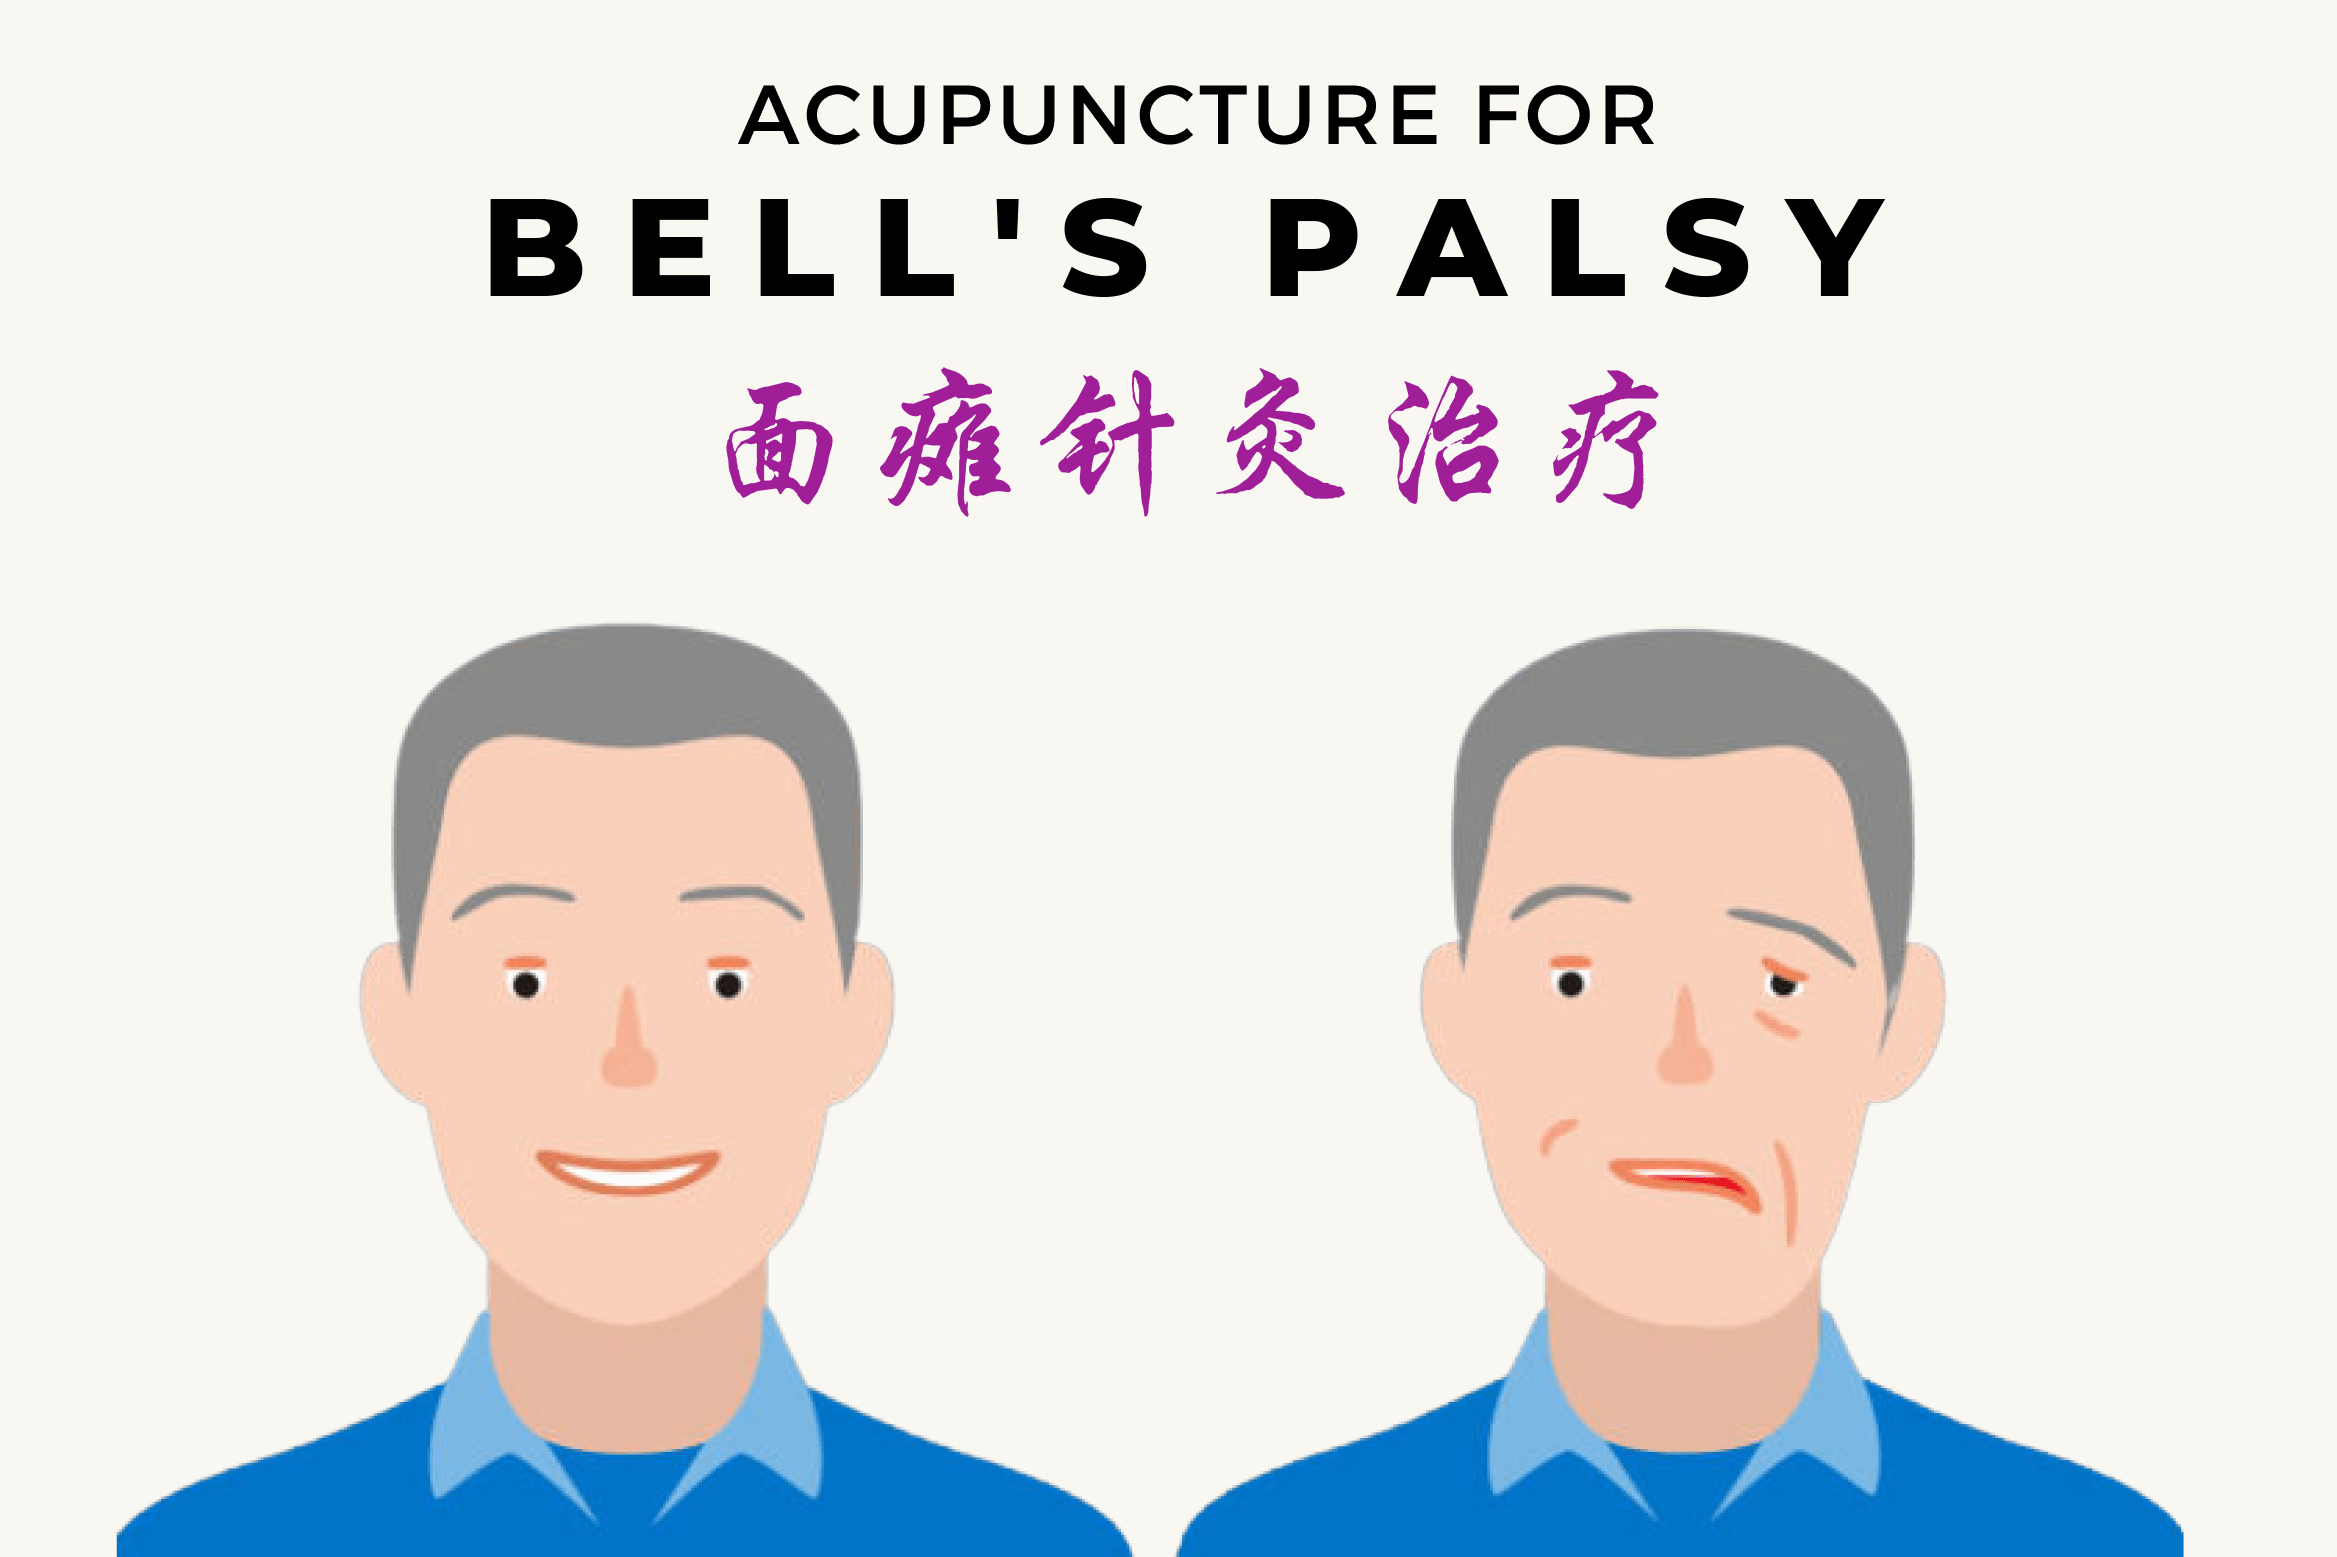 Blog image for Acupuncture for Bell’s Palsy